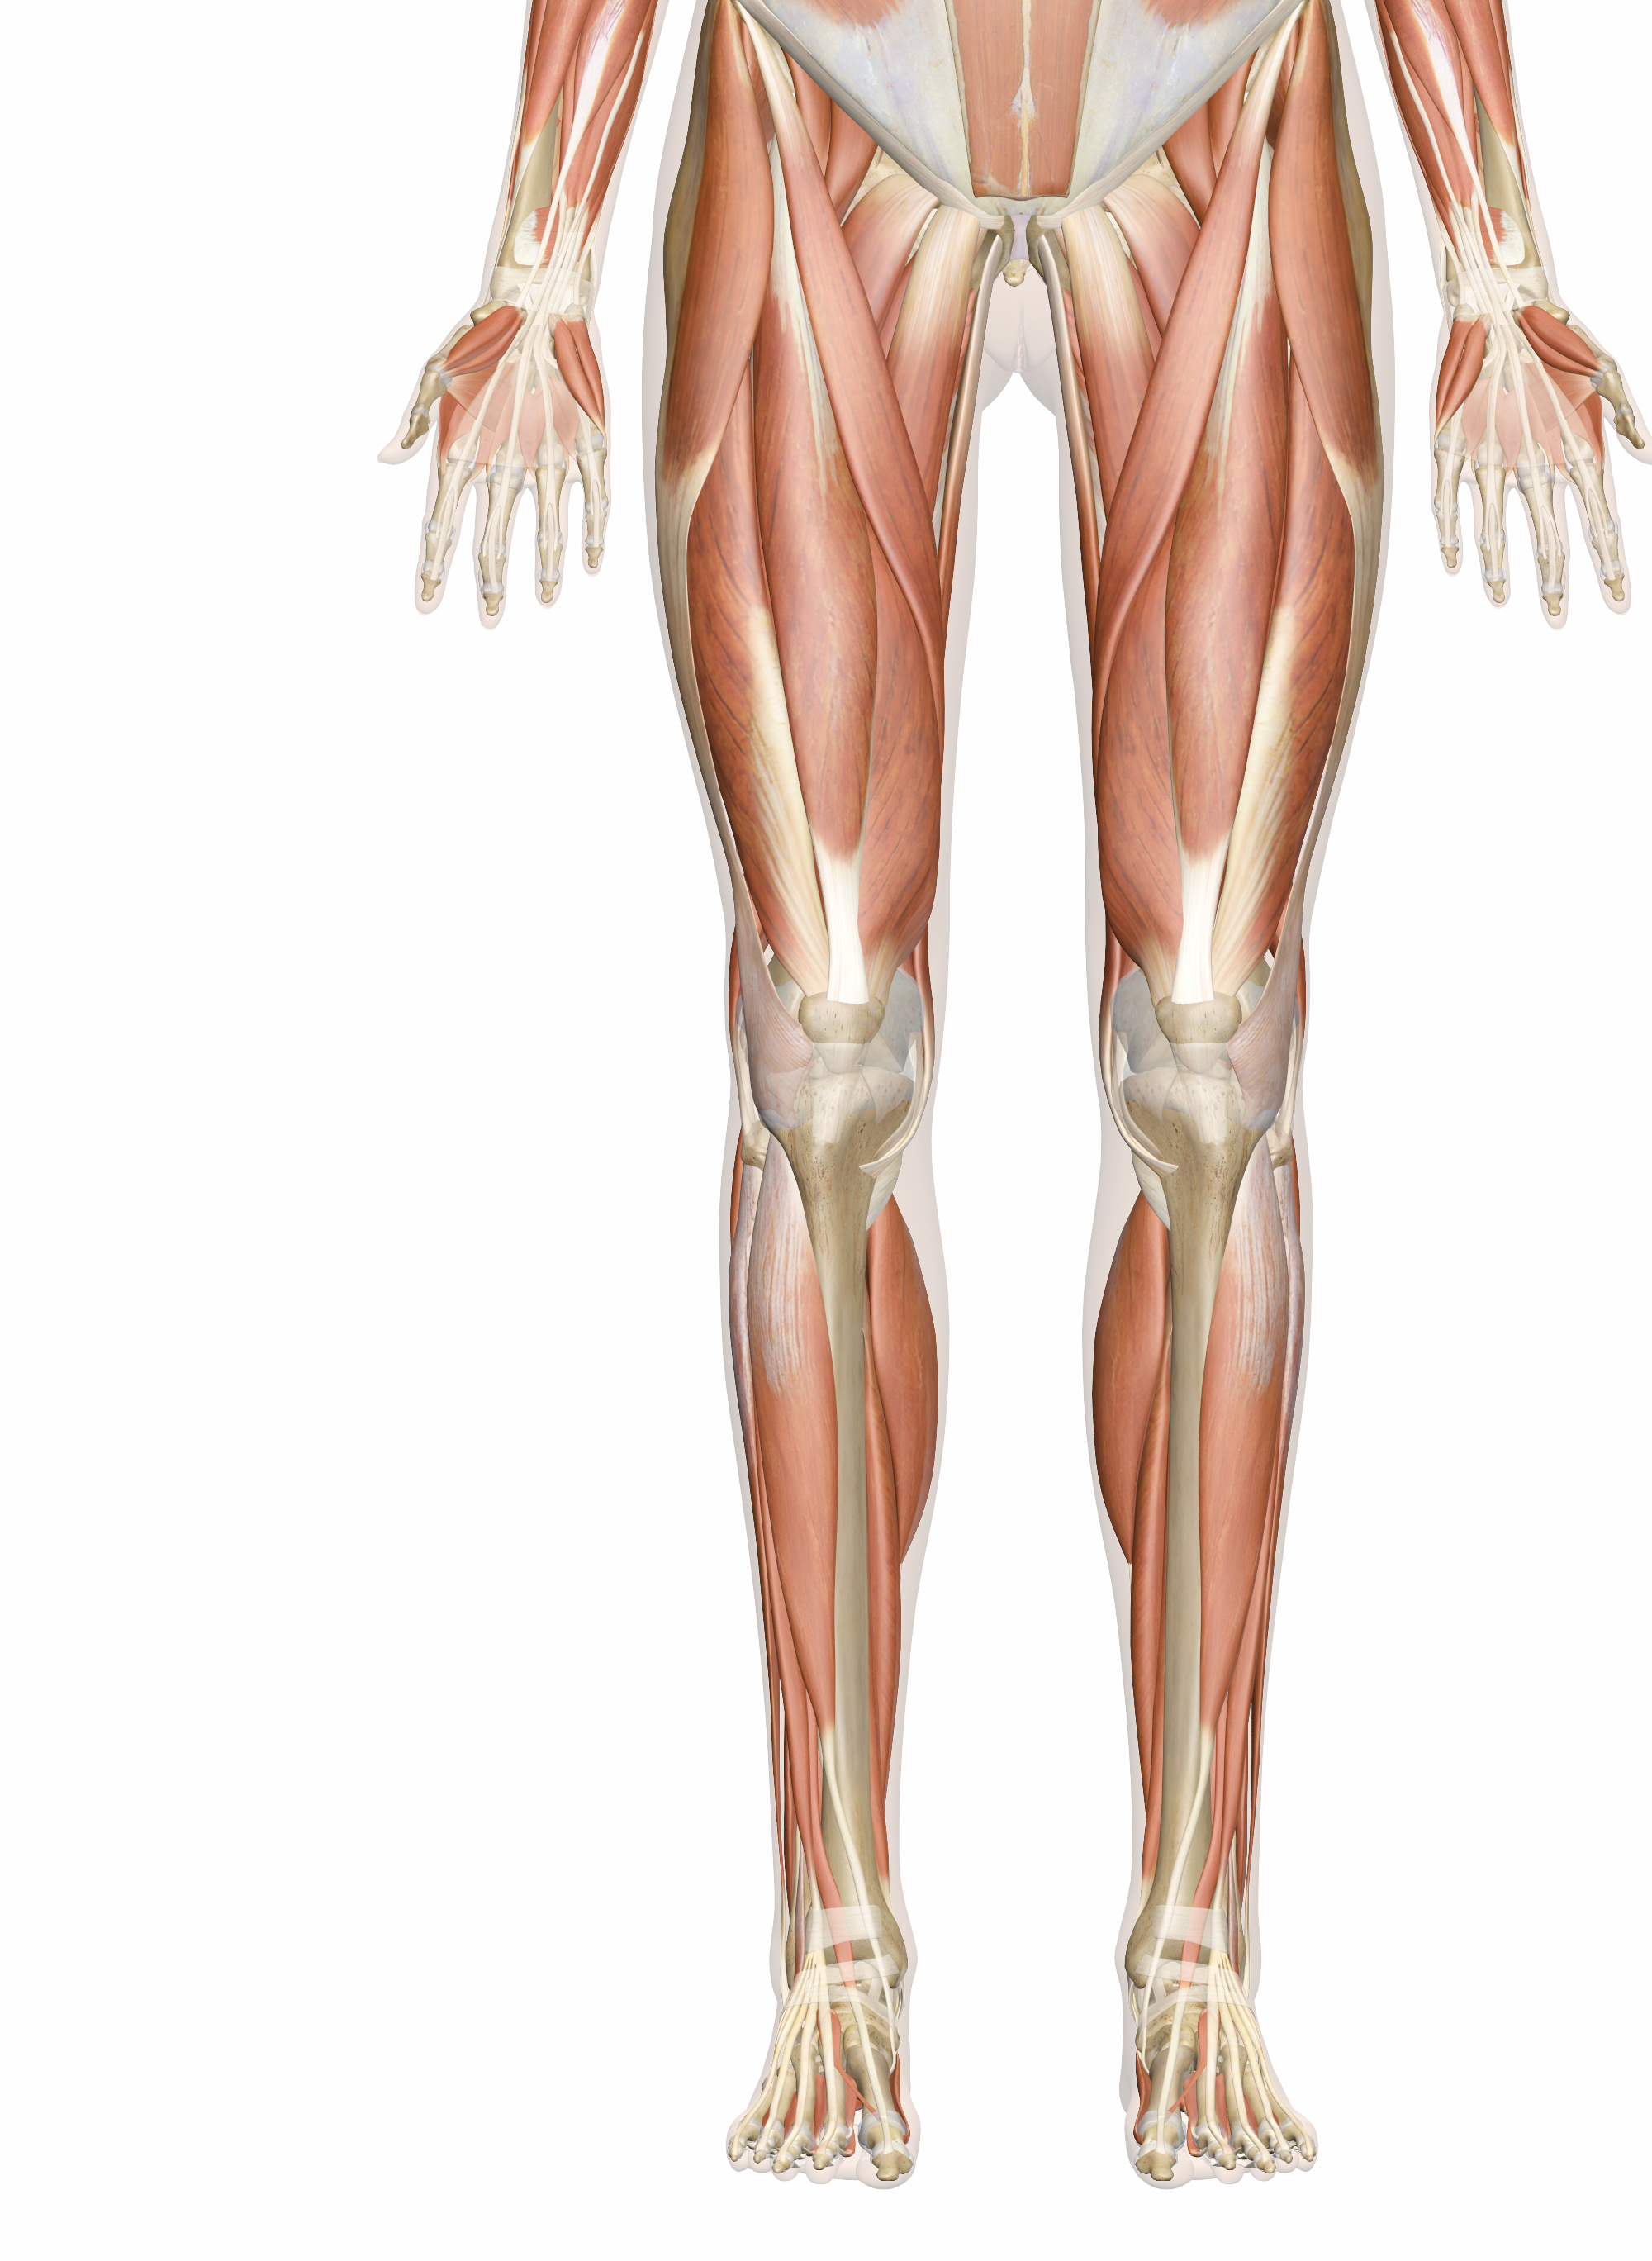 Leg Muscle Diagram Muscles Of The Leg And Foot